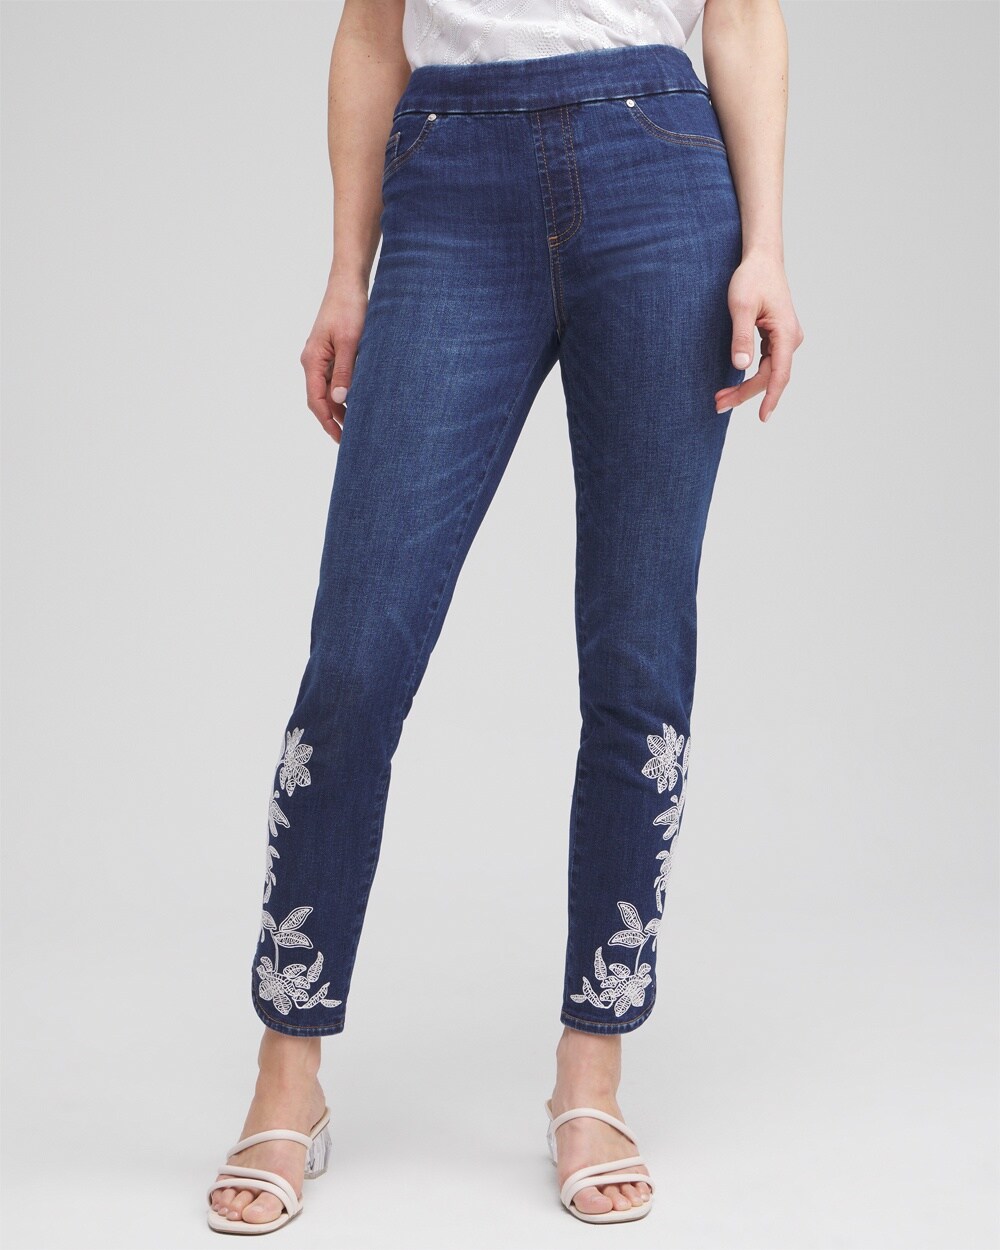 Chico's Embroidered Pull-on Ankle Jeggings In Medium Wash Denim Size 12p/14p |  In Morwenna Indigo